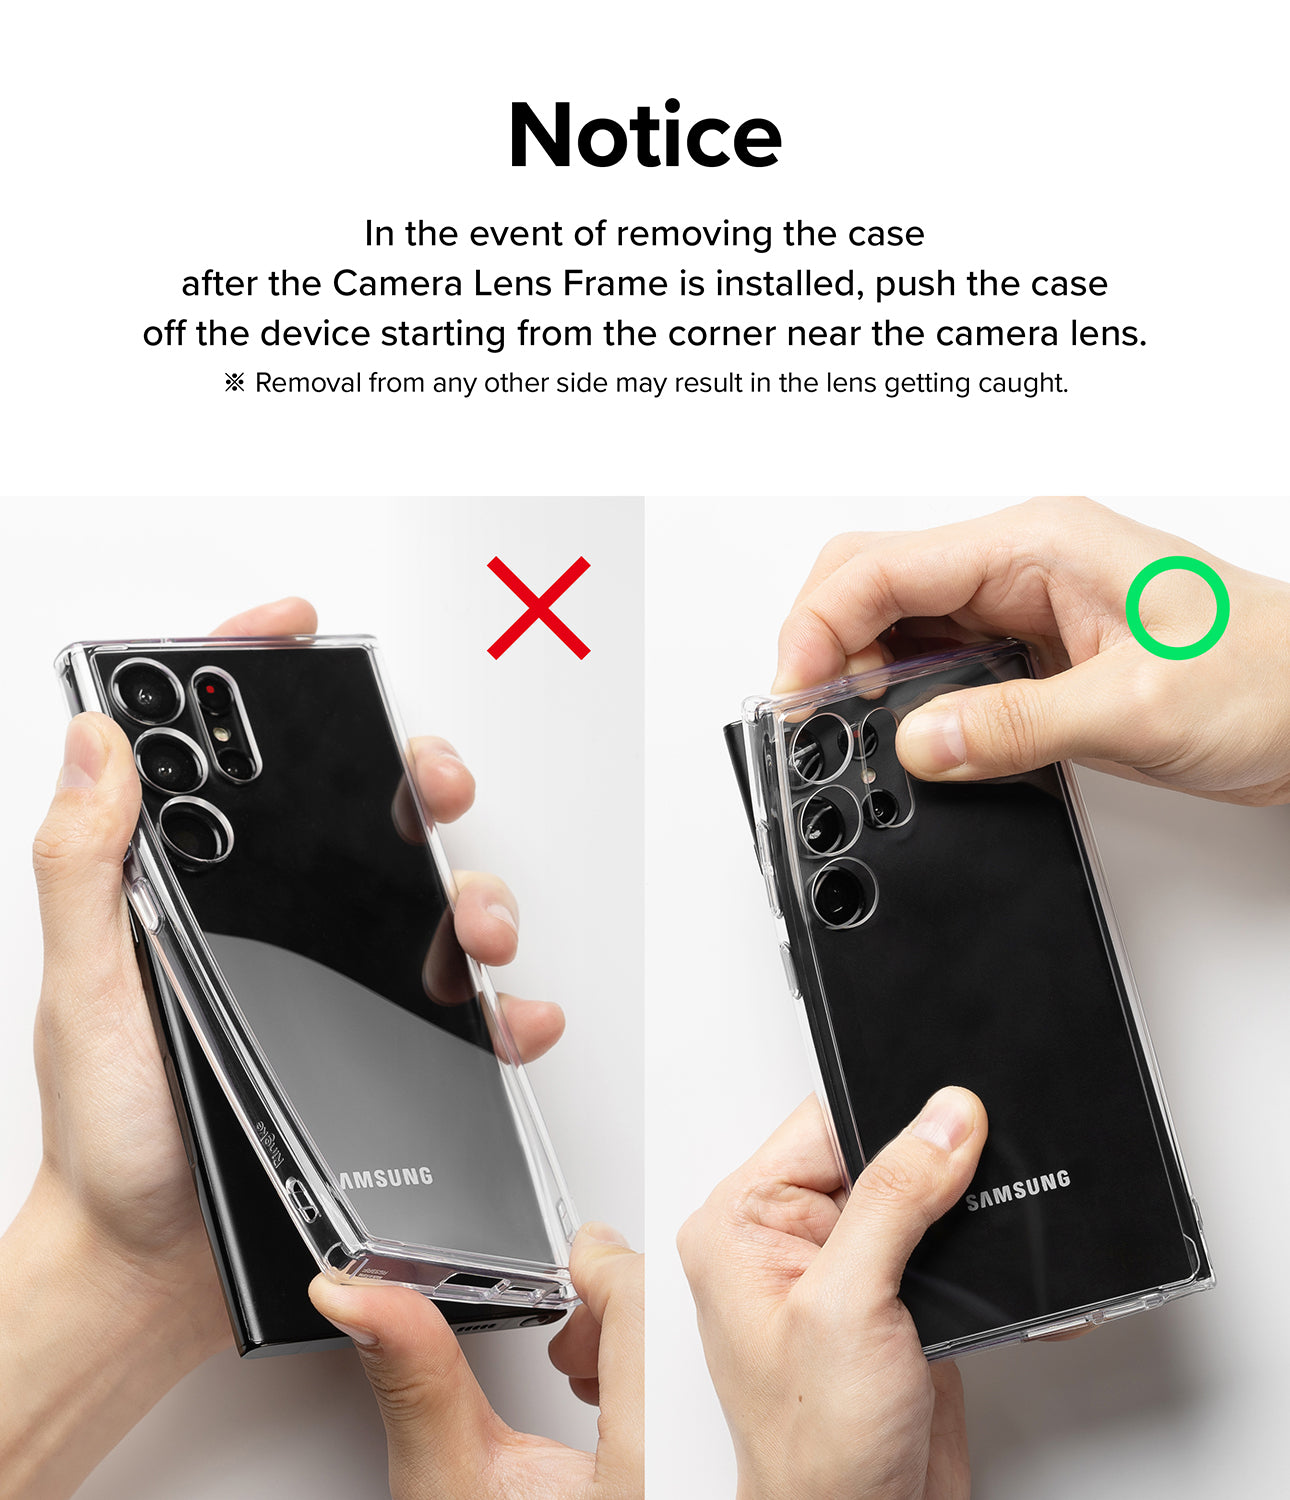 after the camera lens frame is installed, push the case off the device starting from the corner near the camera lens.